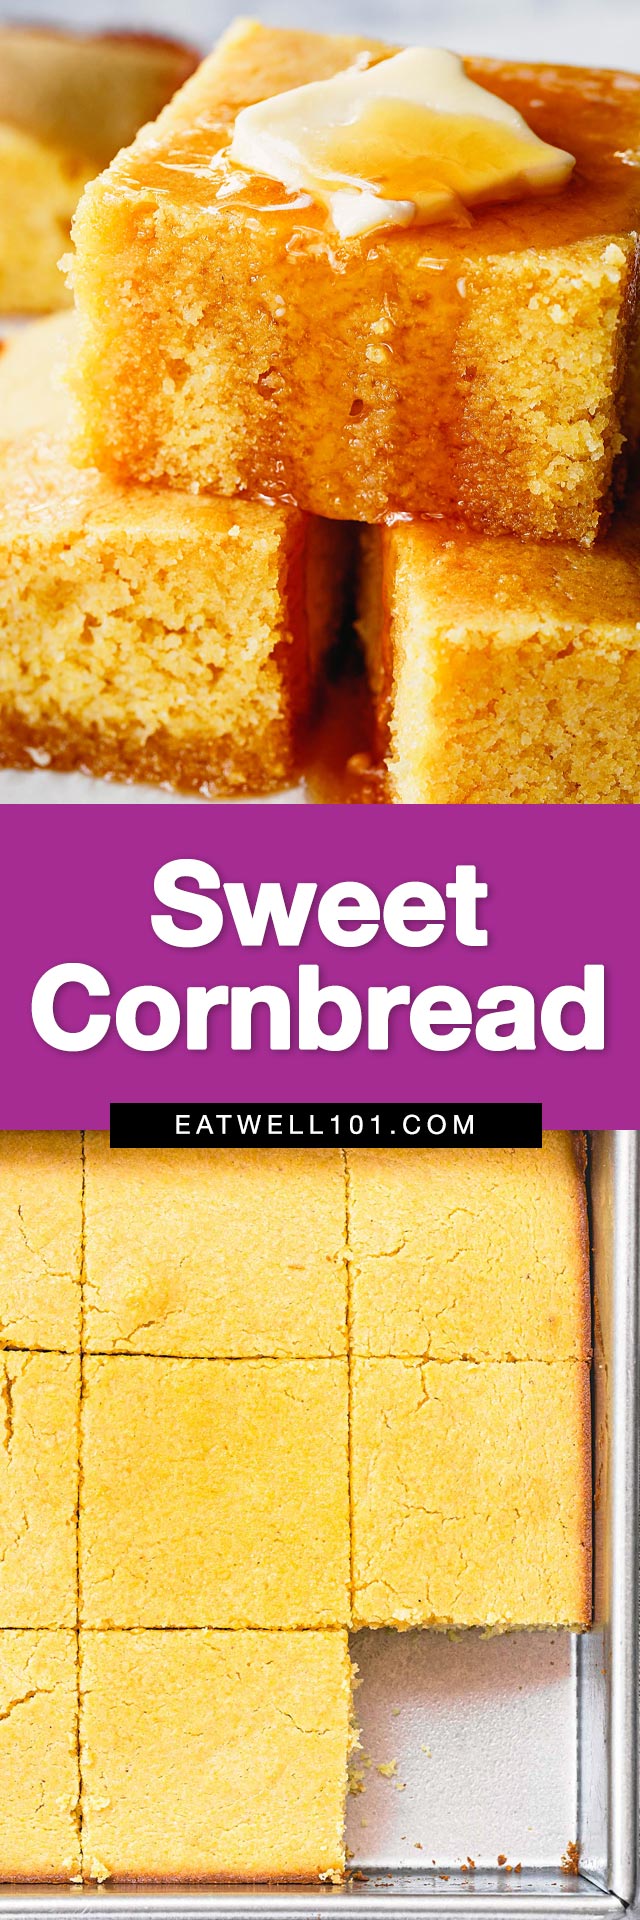 Sweet cornbread recipe - #cornbread #recipe #eatwell101 - The perfect brunch or breakfast! With crispy buttery edges and so moist inside, this cornbread recipe is your new favorite!